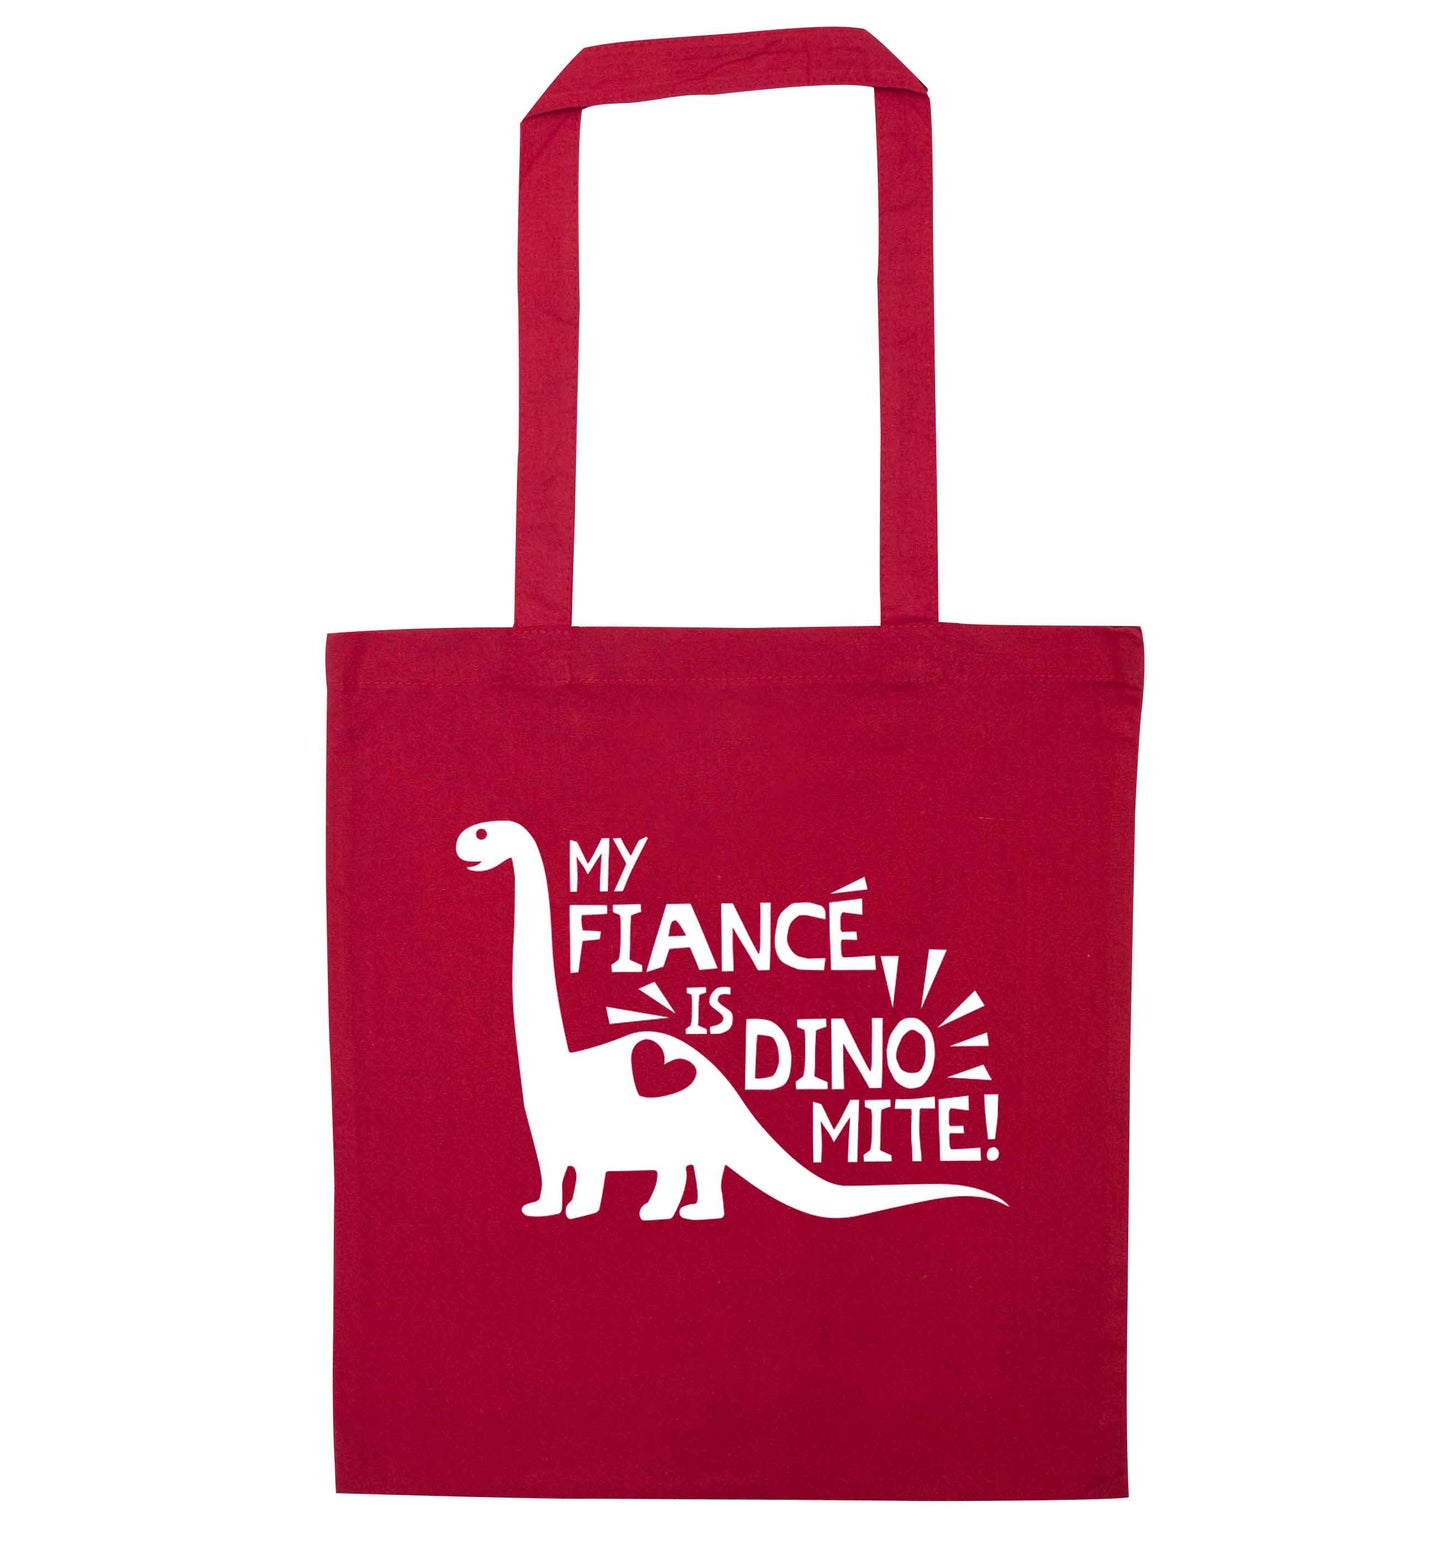 My fiance is dinomite! red tote bag